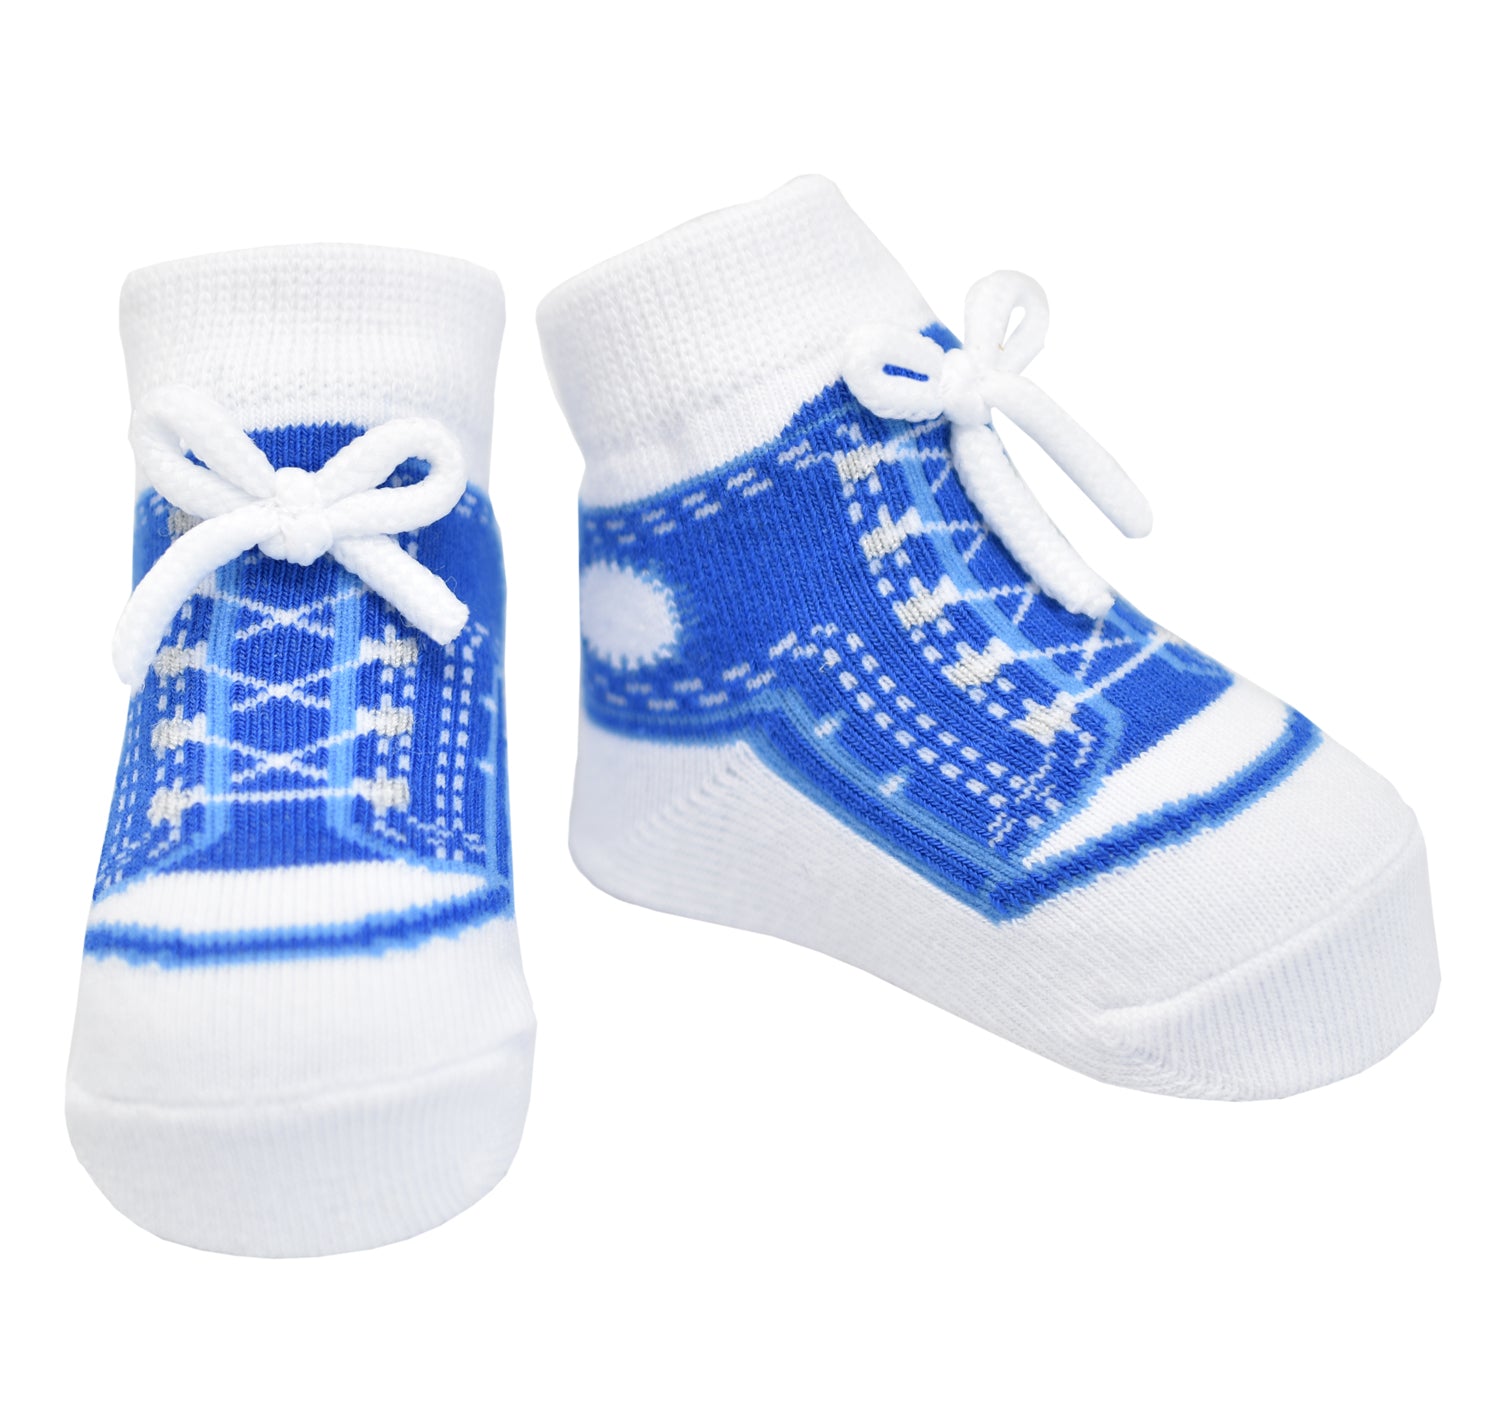 Blue baby boy sneaker socks that look like shoes with faux shoelaces